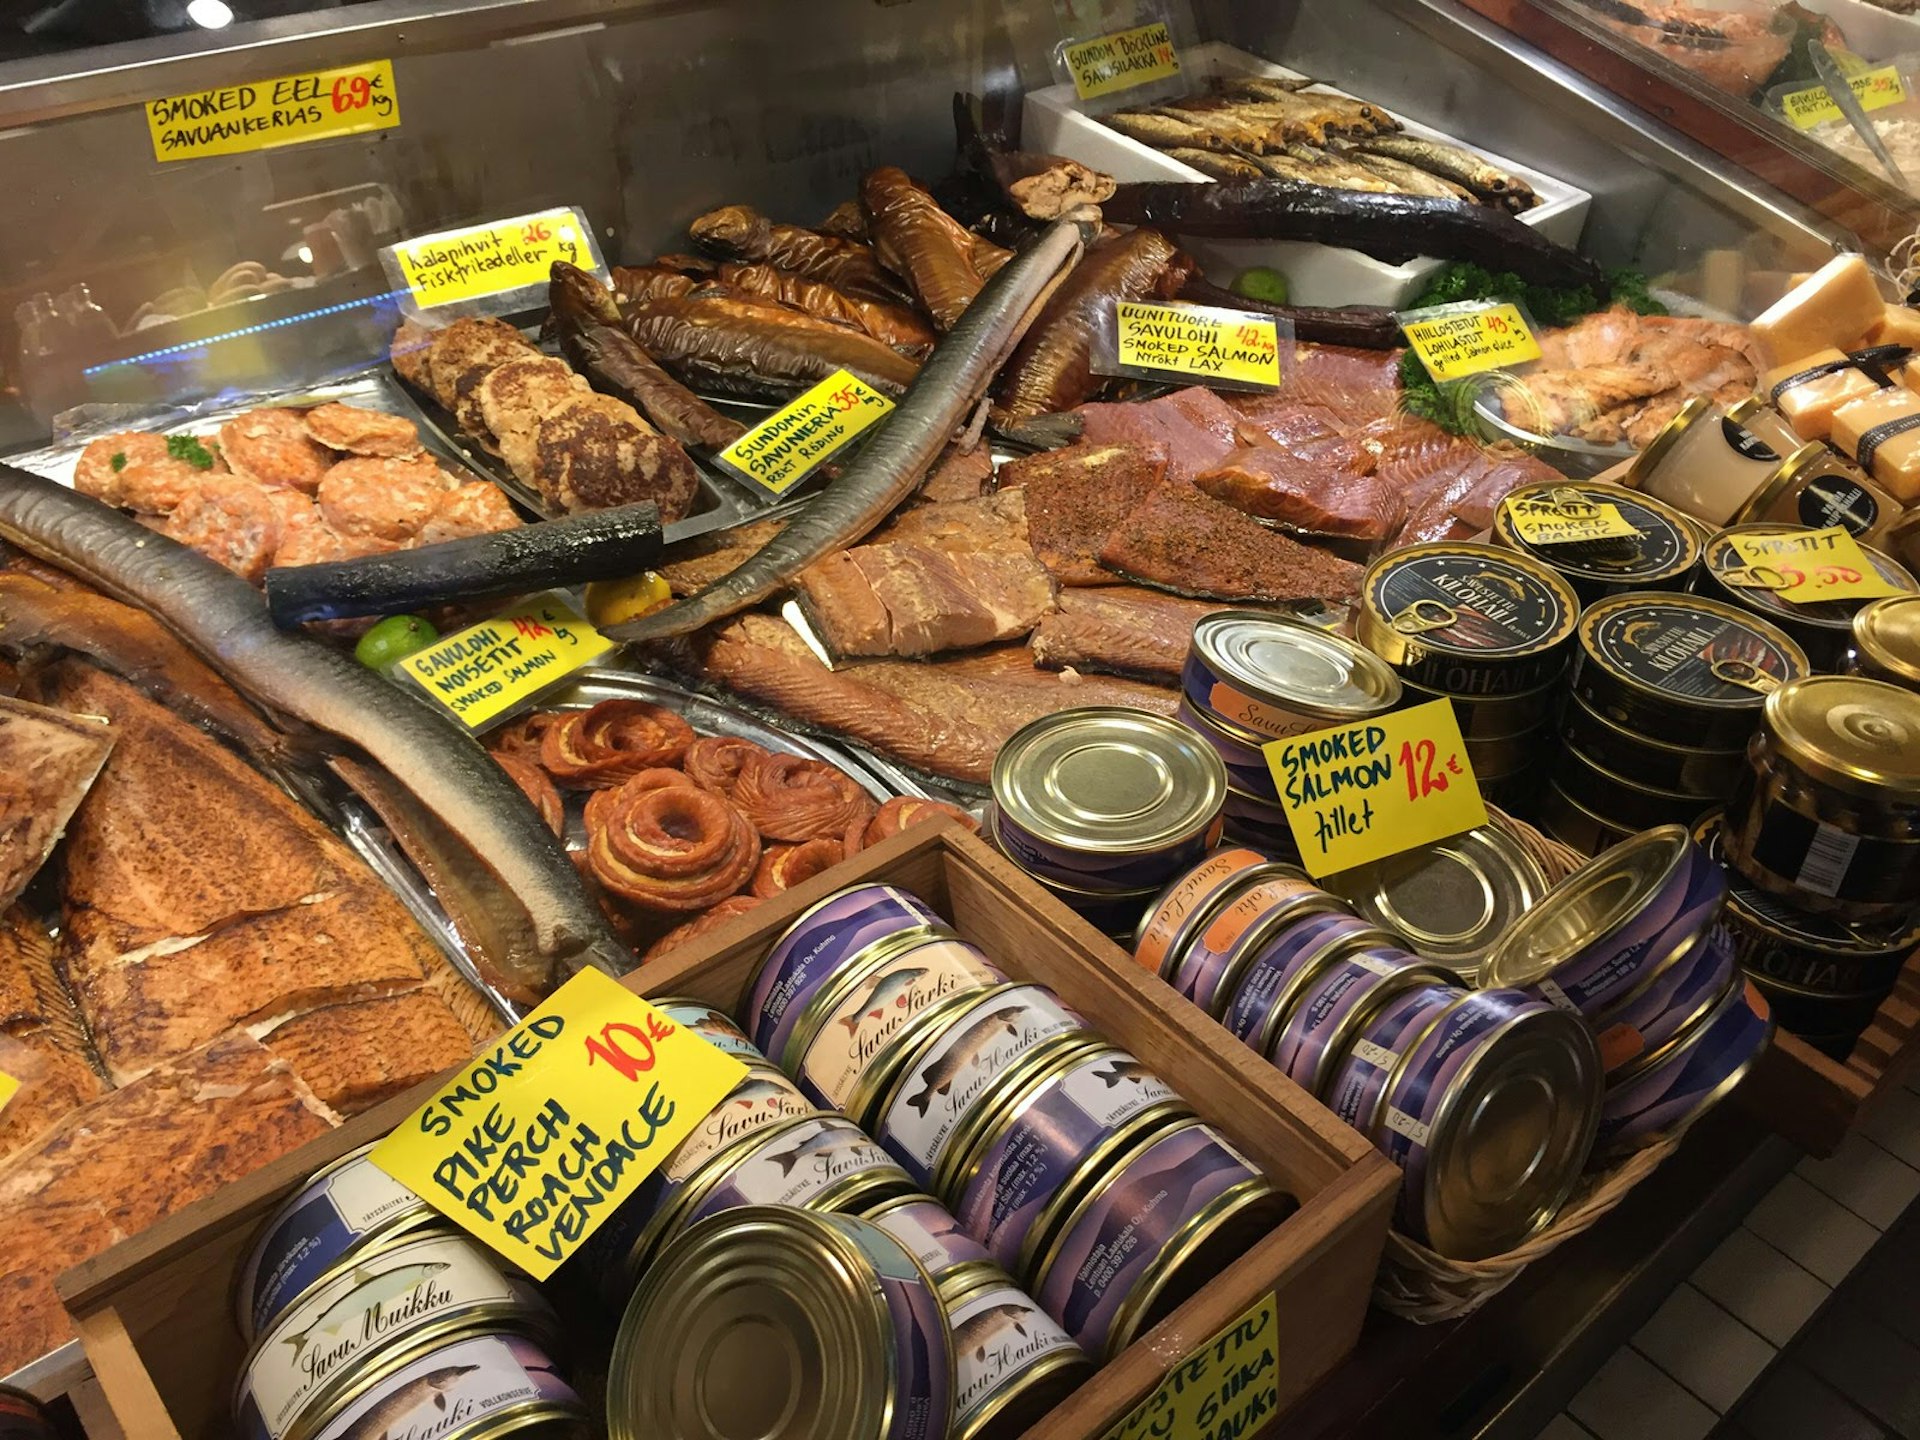 A glass case displaying tins of smoked salmon and a variety of market fish